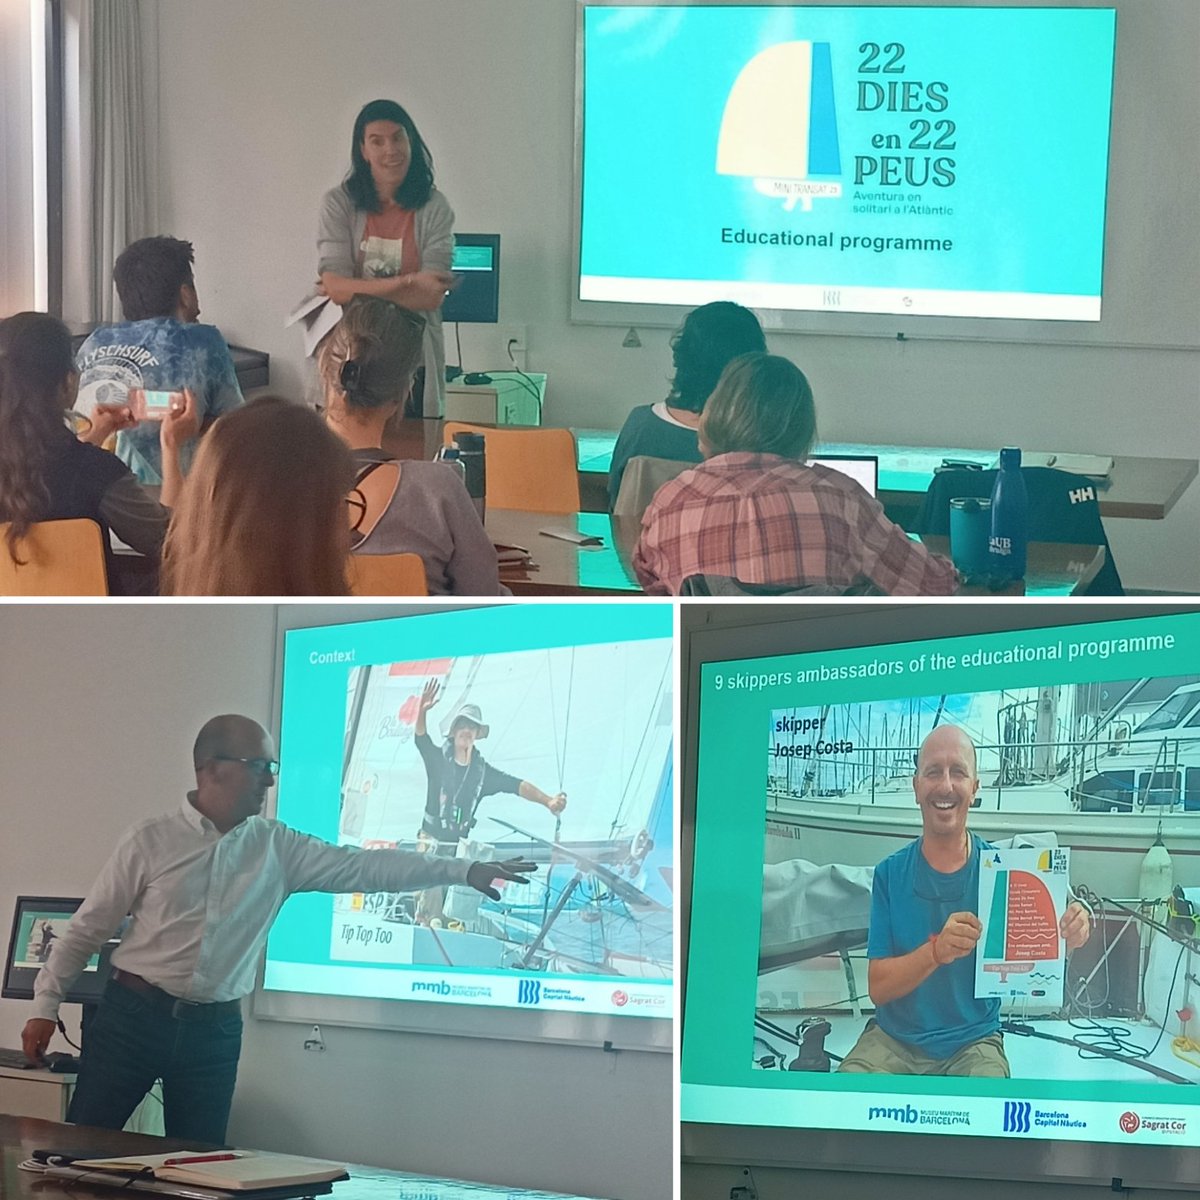 OSES workshop - Focus on the project '22 days in 22 feet, solo adventure in the Atlantic' with Josep Costa and Marta Ros. Thanks to the organizers, @UniBarcelona and @surfriderespana, and the speakers for their involvement. @SagratCorDip @bcnautica @MuseuMaritim #ocean